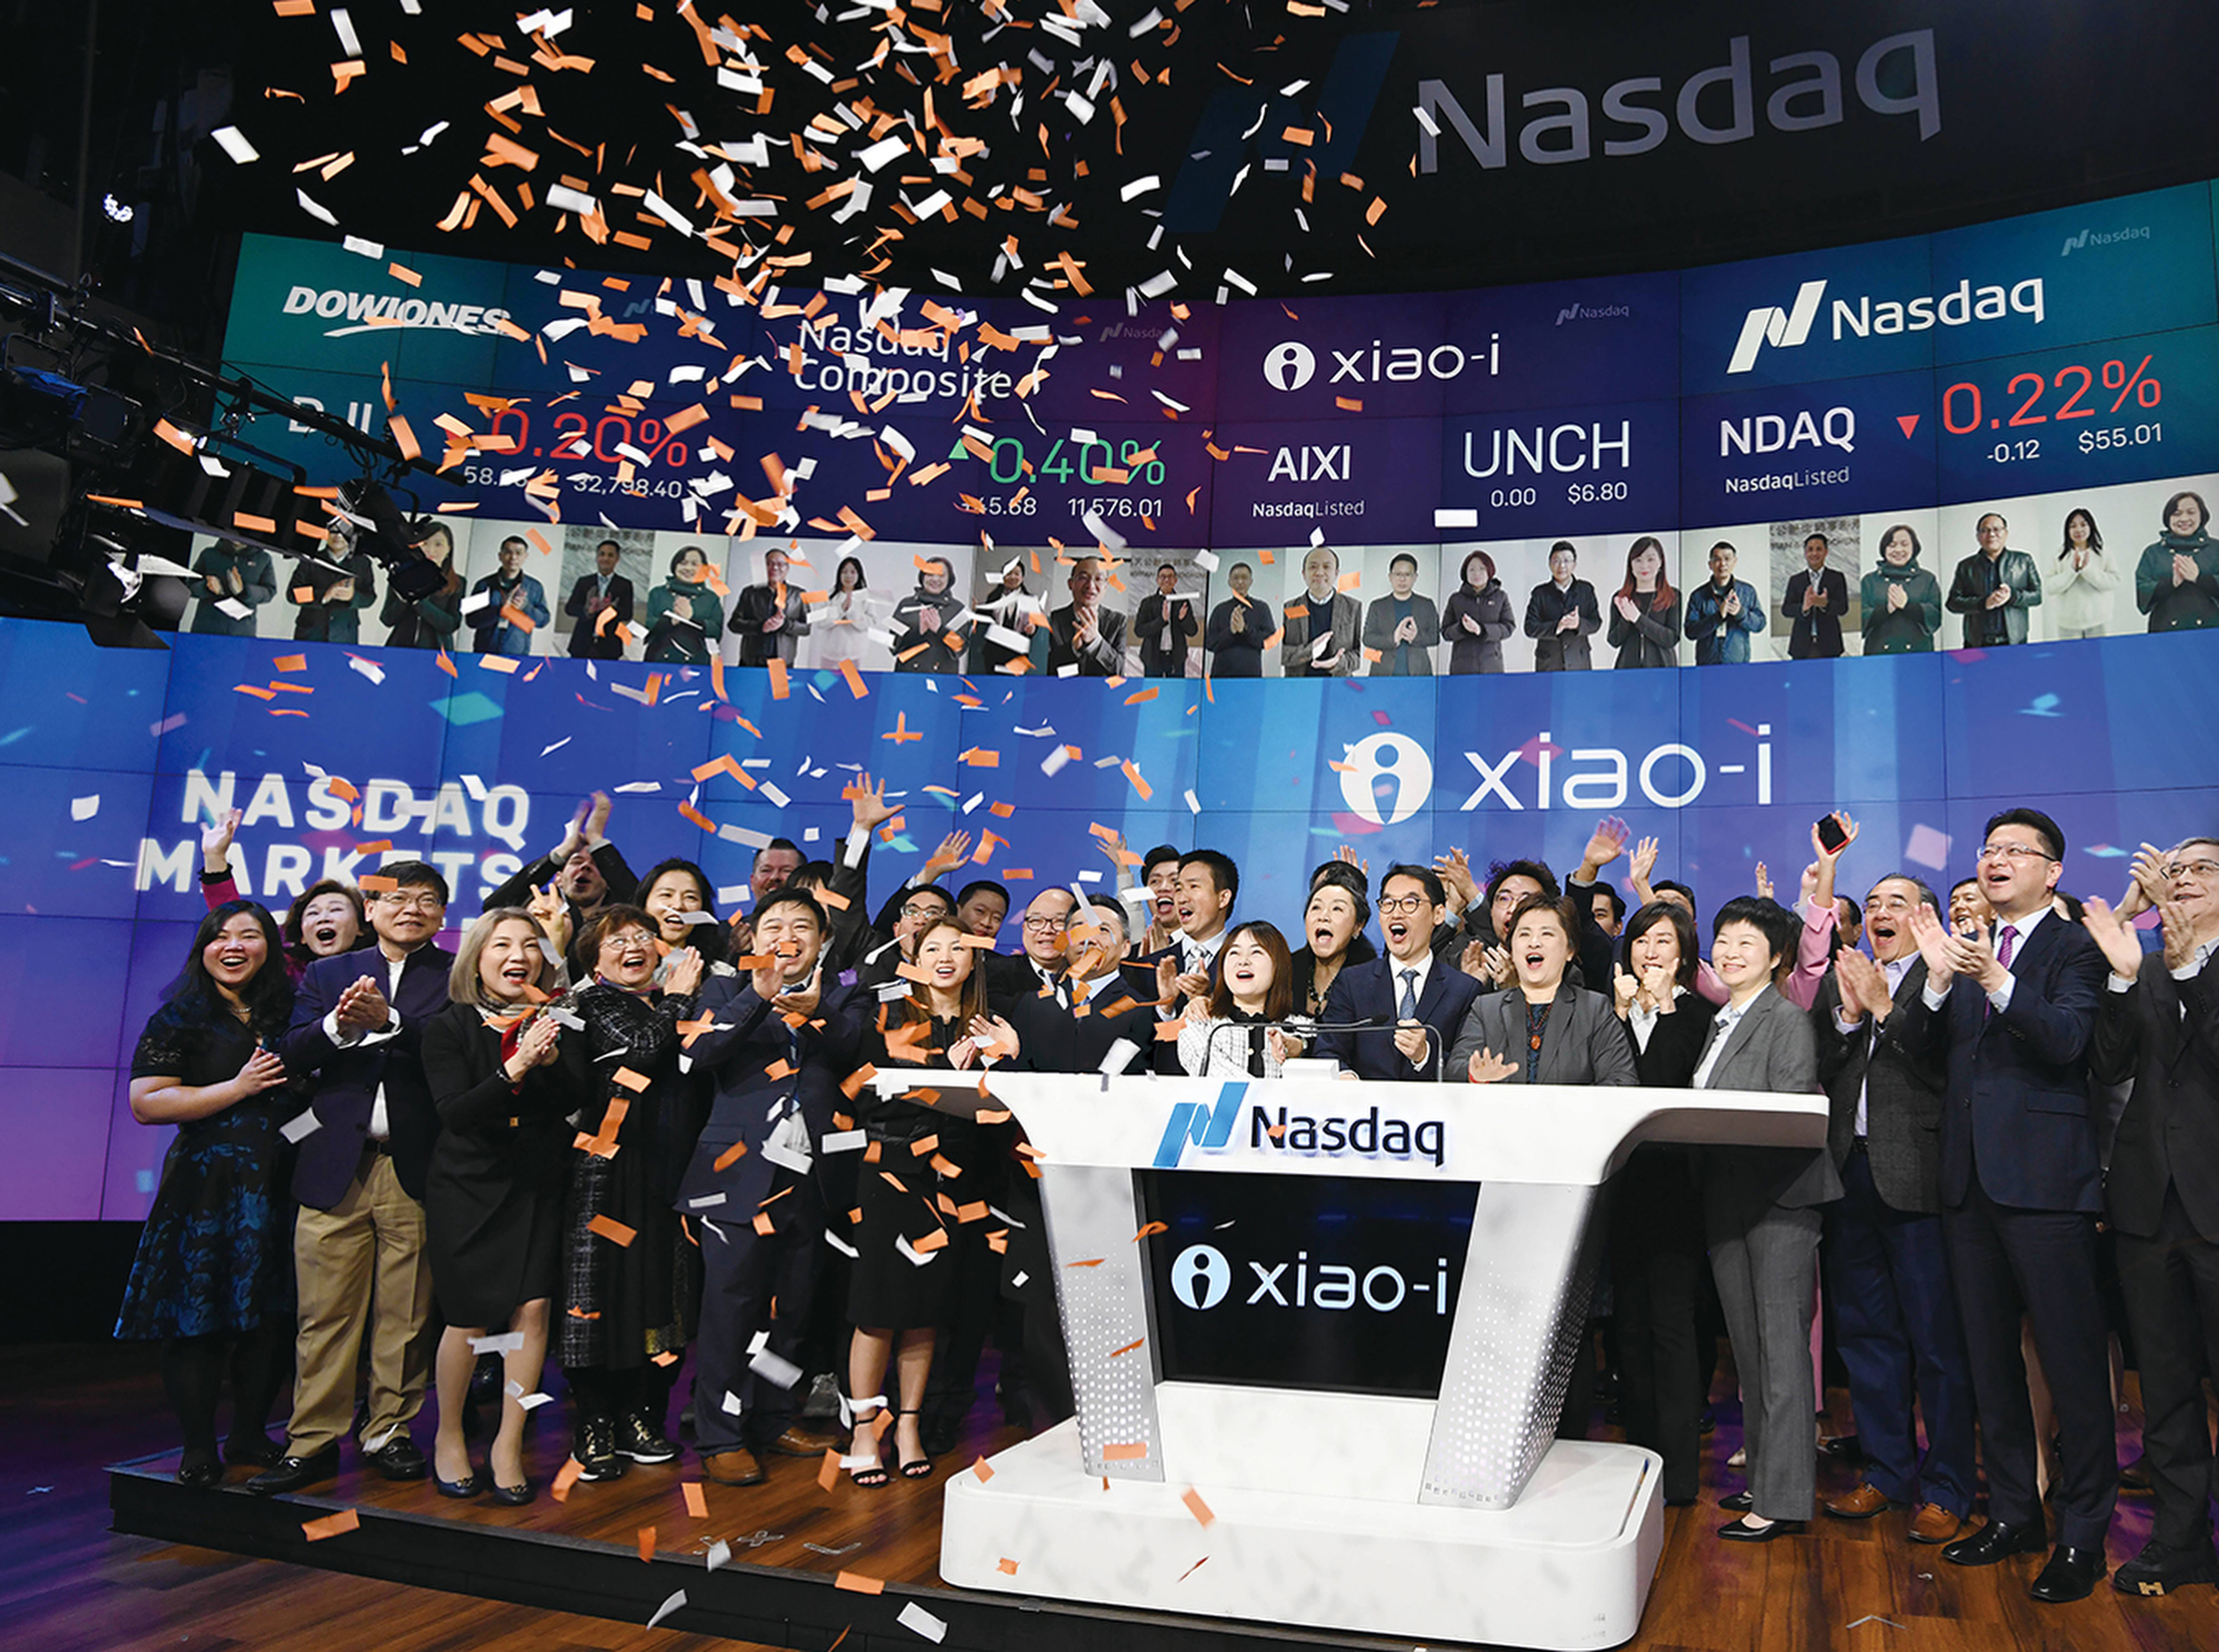 Xiao-I Corp’s senior management and guests take part in the ceremonial ringing of the opening bell at the Nasdaq Stock Market in New York City on March 9, 2023. Photo: Handout